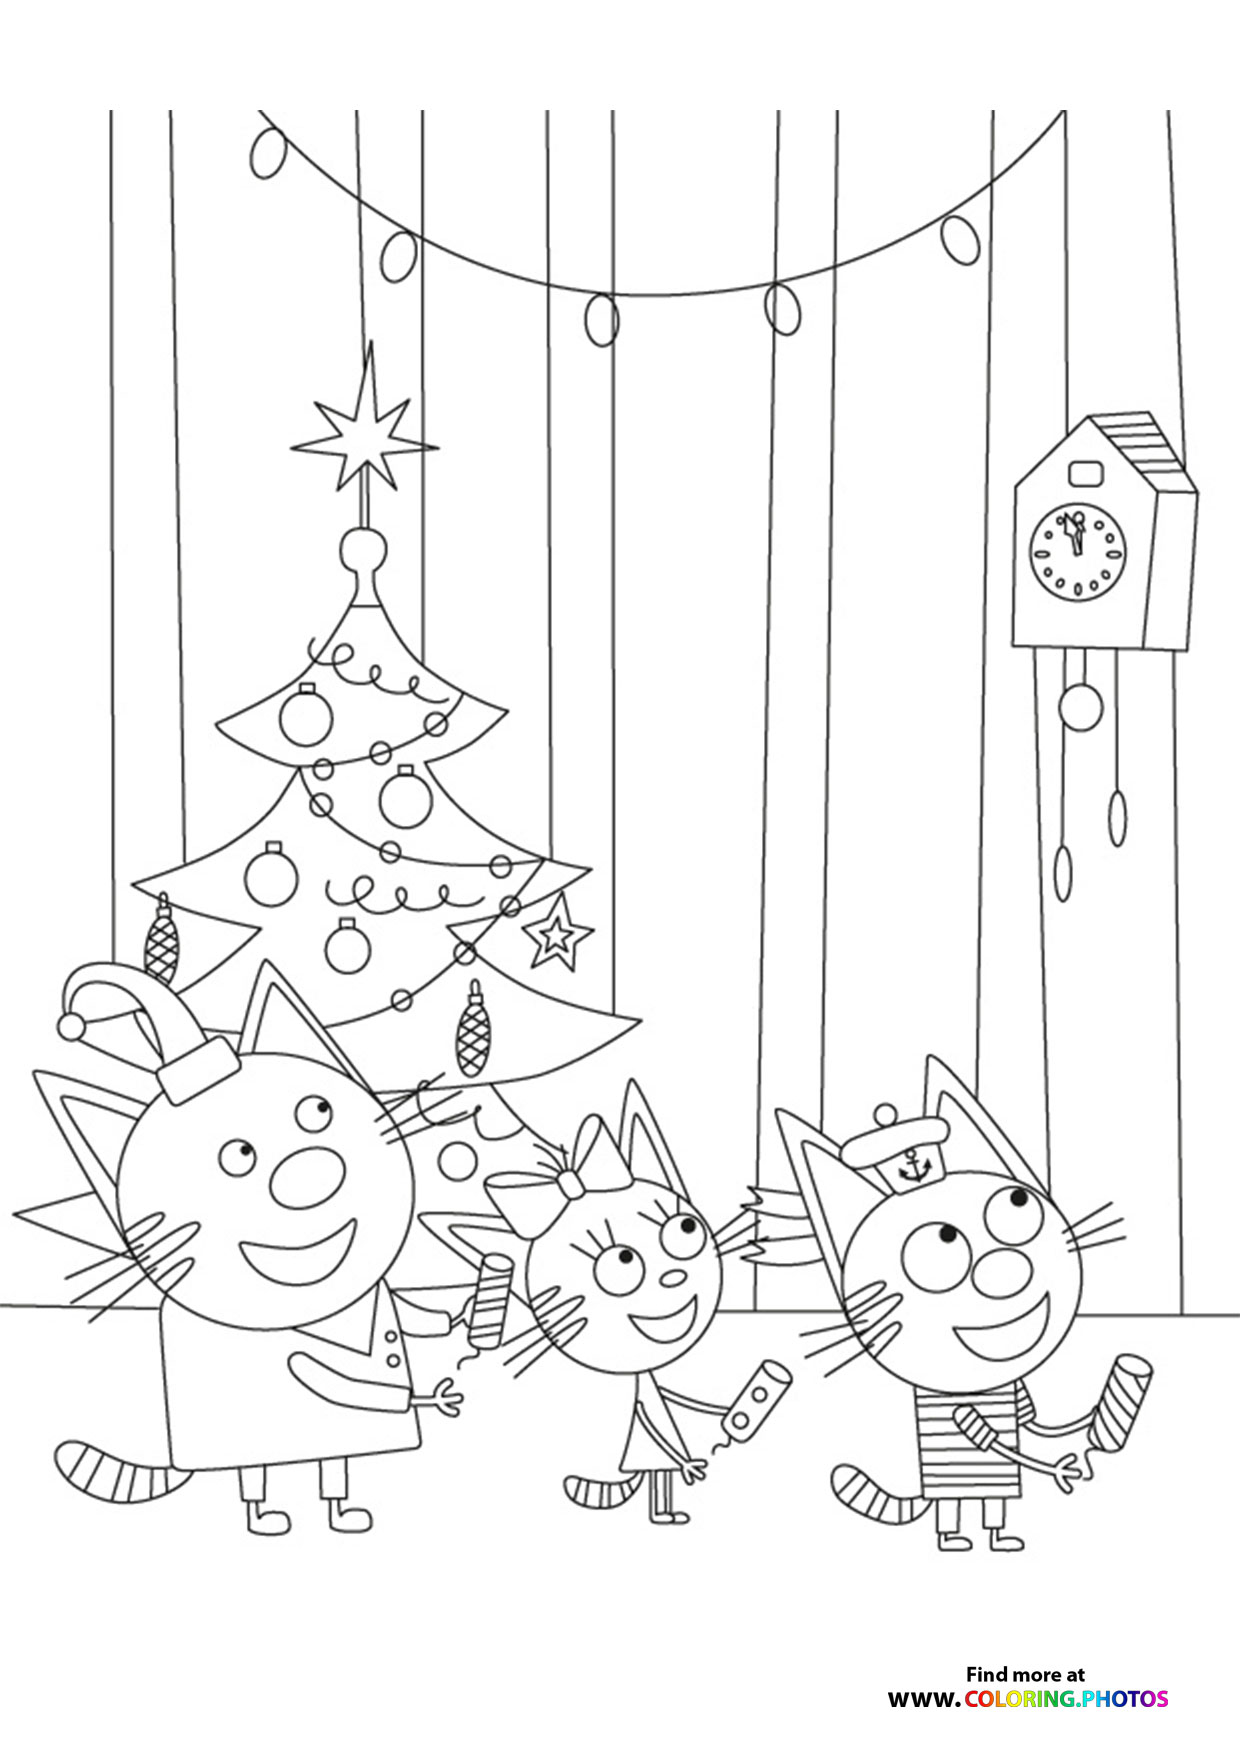 Candy Pudding and Cookie   Coloring Pages for kids